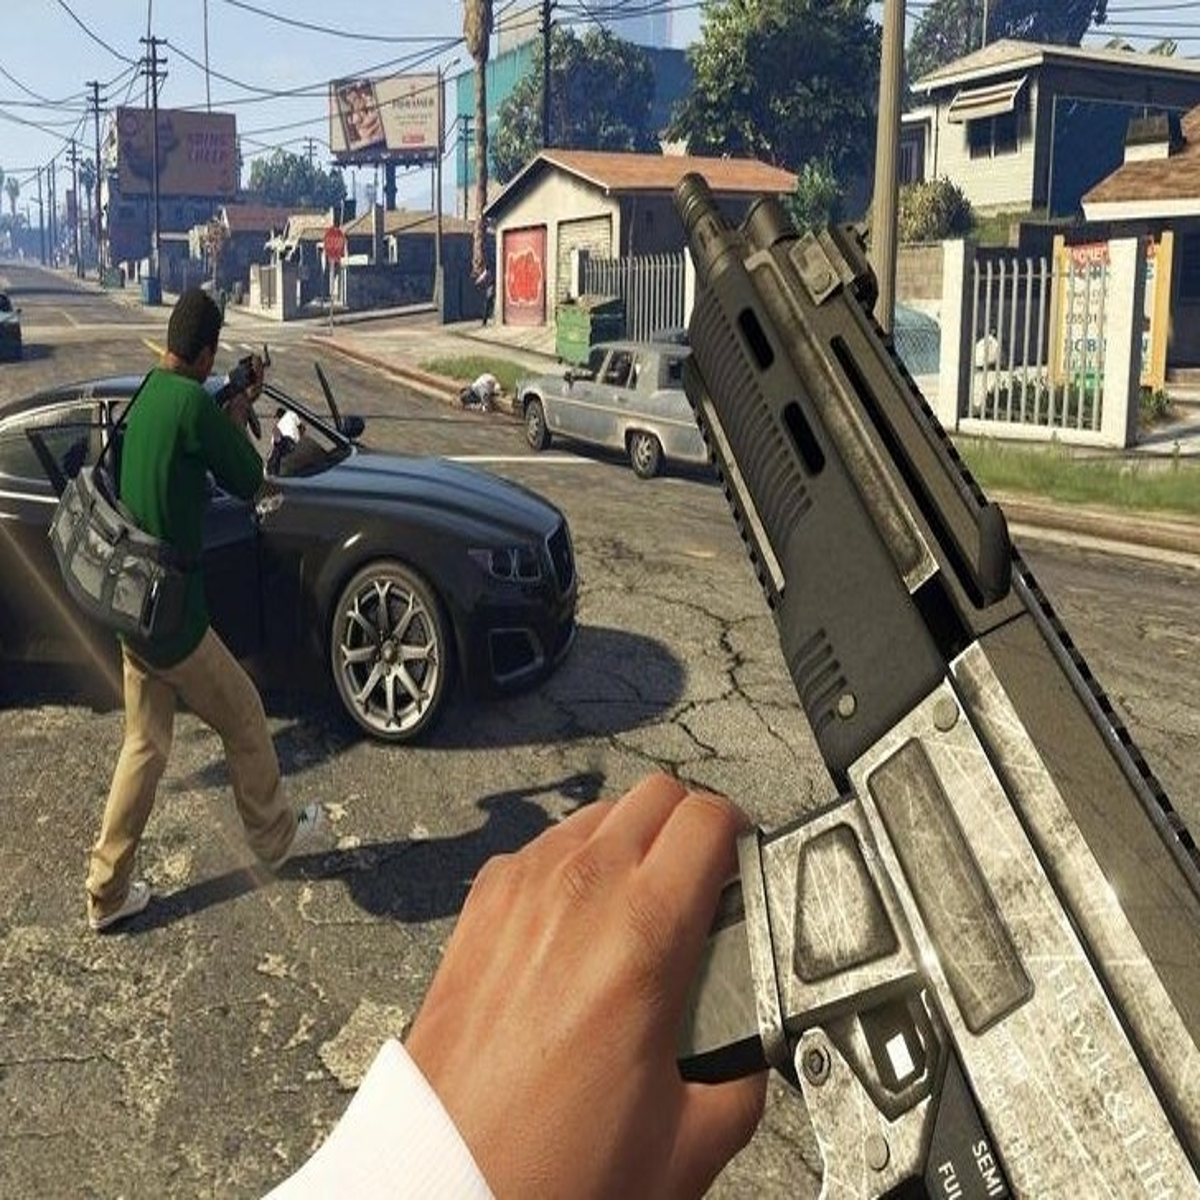 Grand Theft Auto 5 Gets Its First Mod - IGN News - IGN